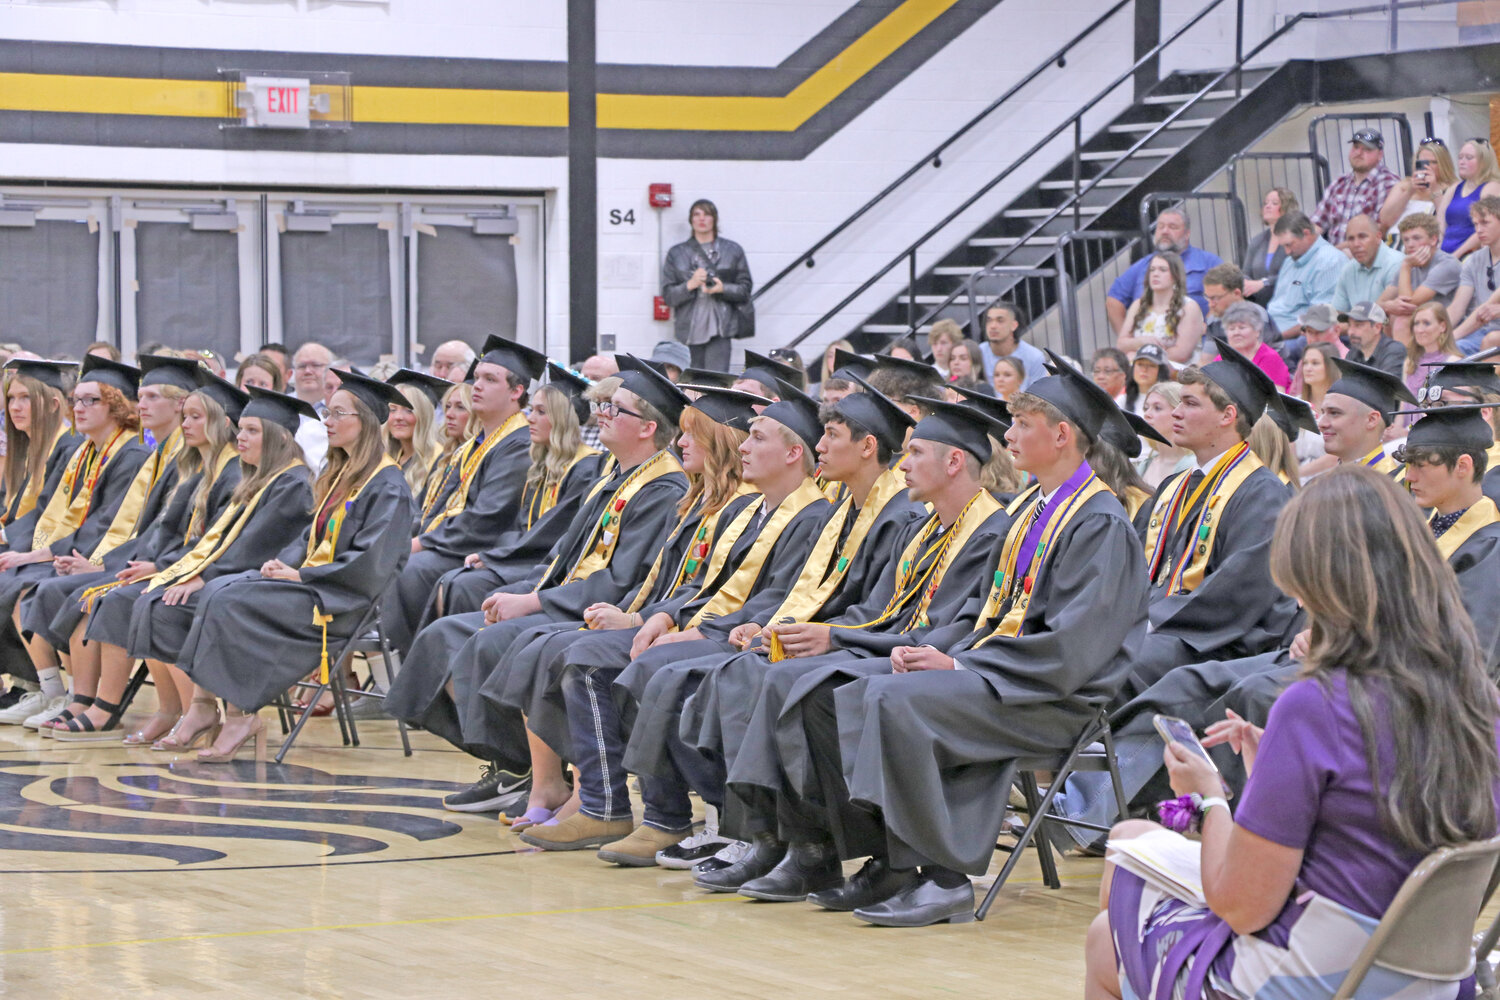 The Lone Tree class of 2023 listening to speakers such as superintendent Kurt Devore, high school principal Andrew Koshatka and the teacher of their choosing, Mick Dickinson.